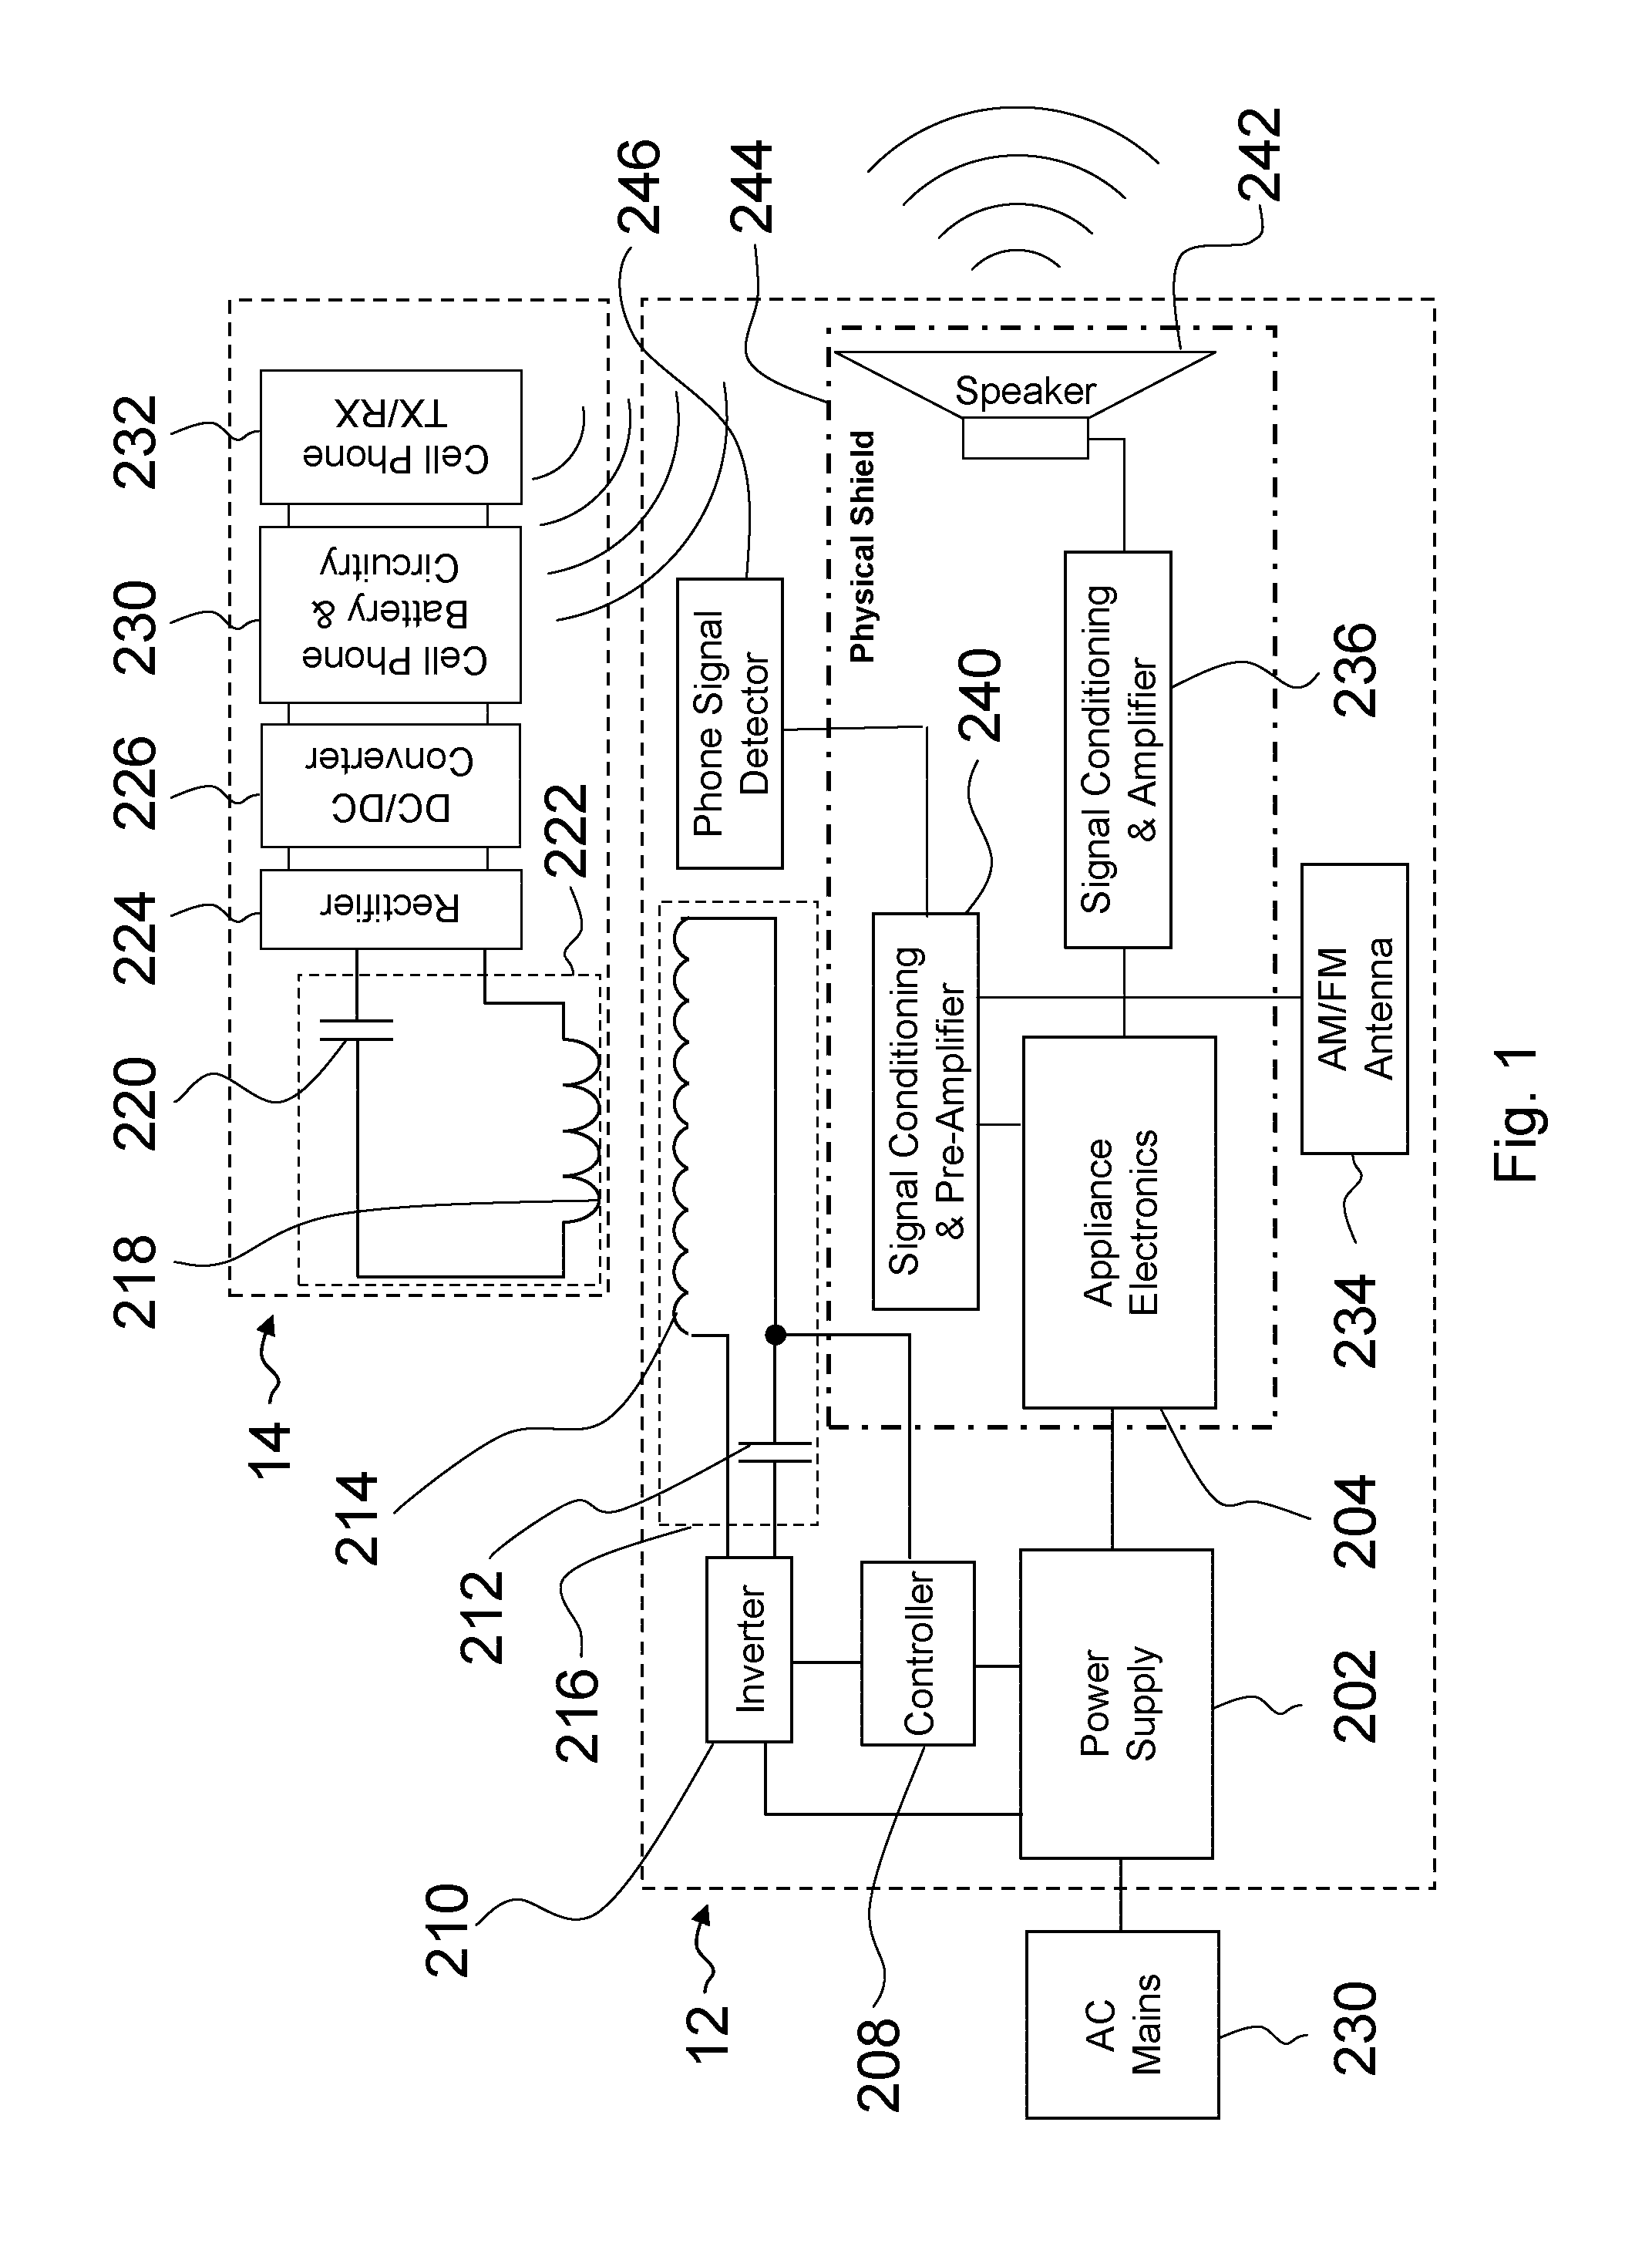 Integrated wireless power system